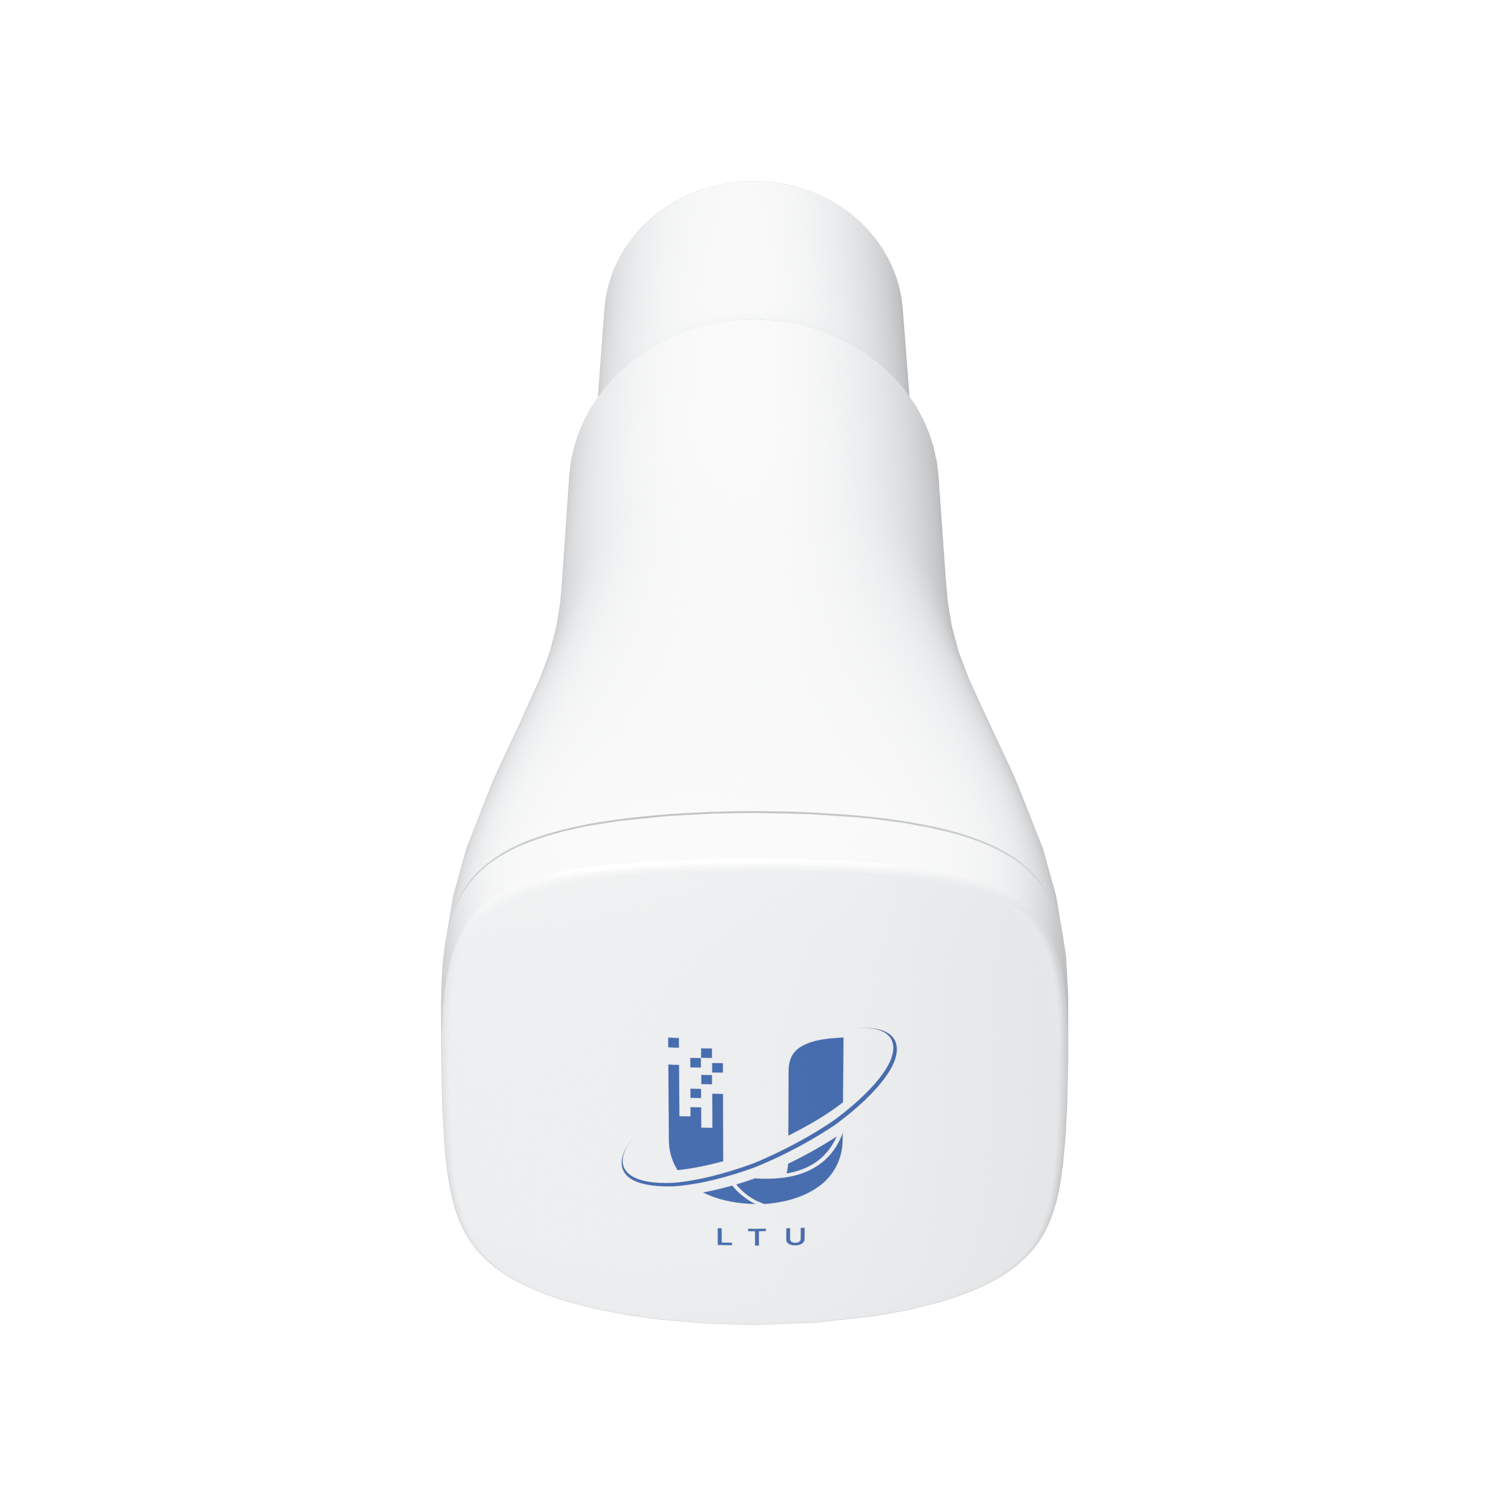 Ubiquiti LTU Instant (5-pack), 5 GHz LTU Client Functions In A Point-to-multipoint (PtMP) Environment - 5 PACK,  Incl 2Yr Warr